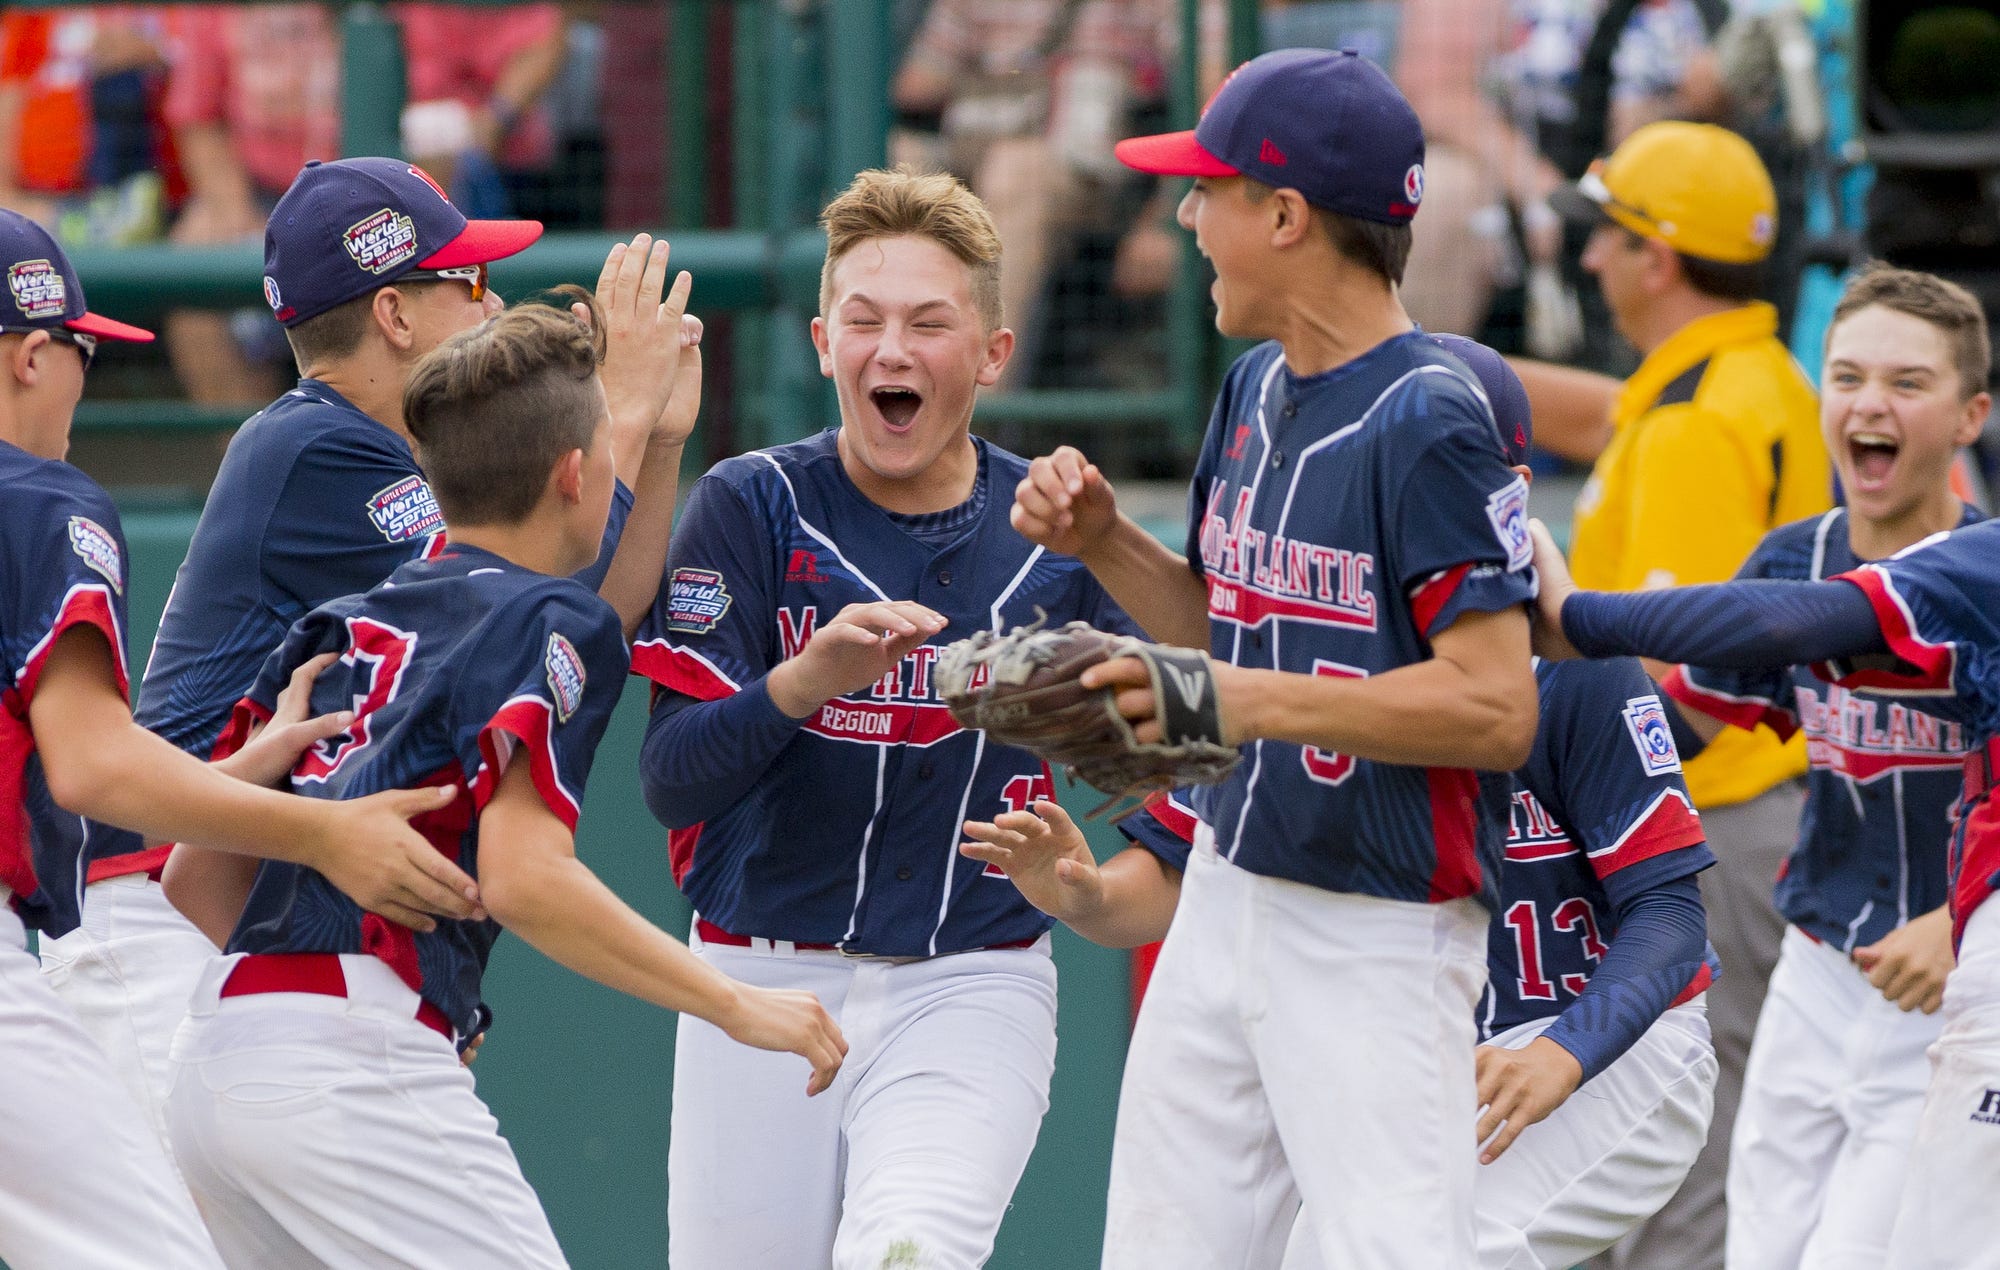 Maine-Endwell's Little League champs: Look-back and catch-up with team